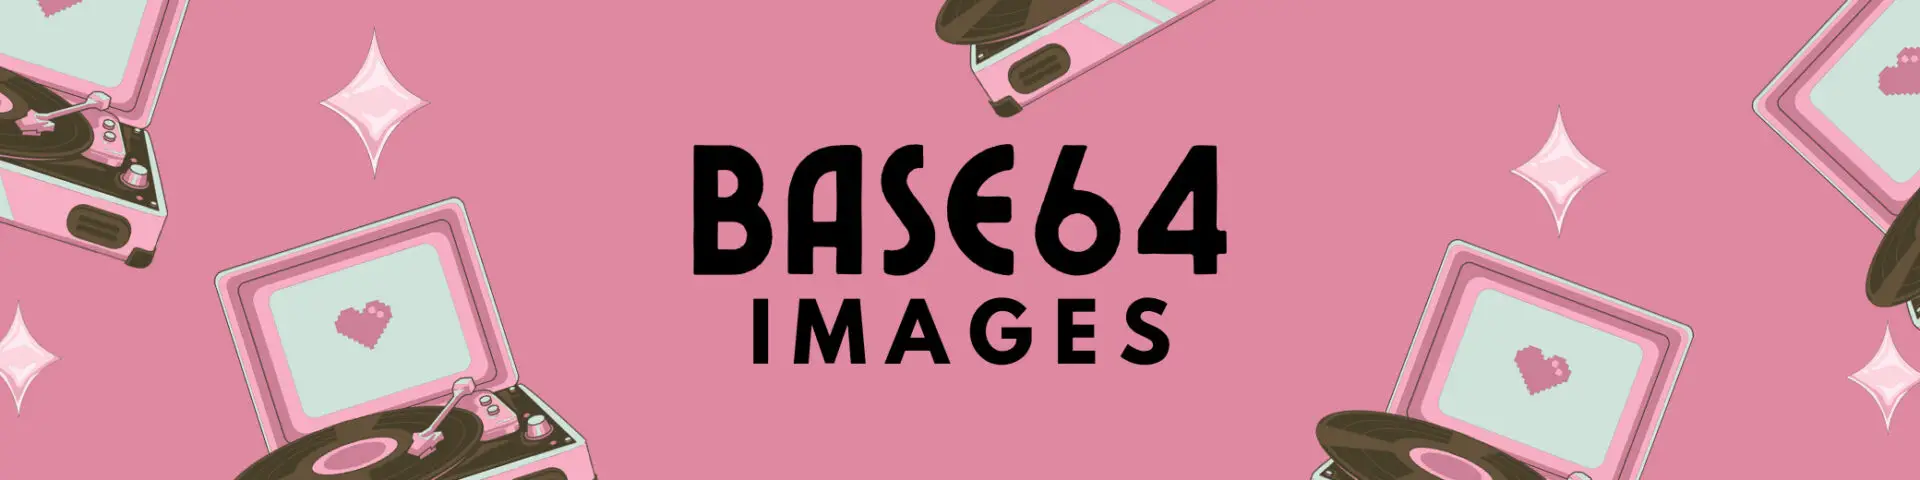 Base64 image encoding is a data-handling technology that converts binary picture data to text in real time. In this post, we'll debunk Base64 images, look into their uses, and present a quick introduction to encoding images in this format. Let's take a look at how Base64 encoding can help you handle data more efficiently.